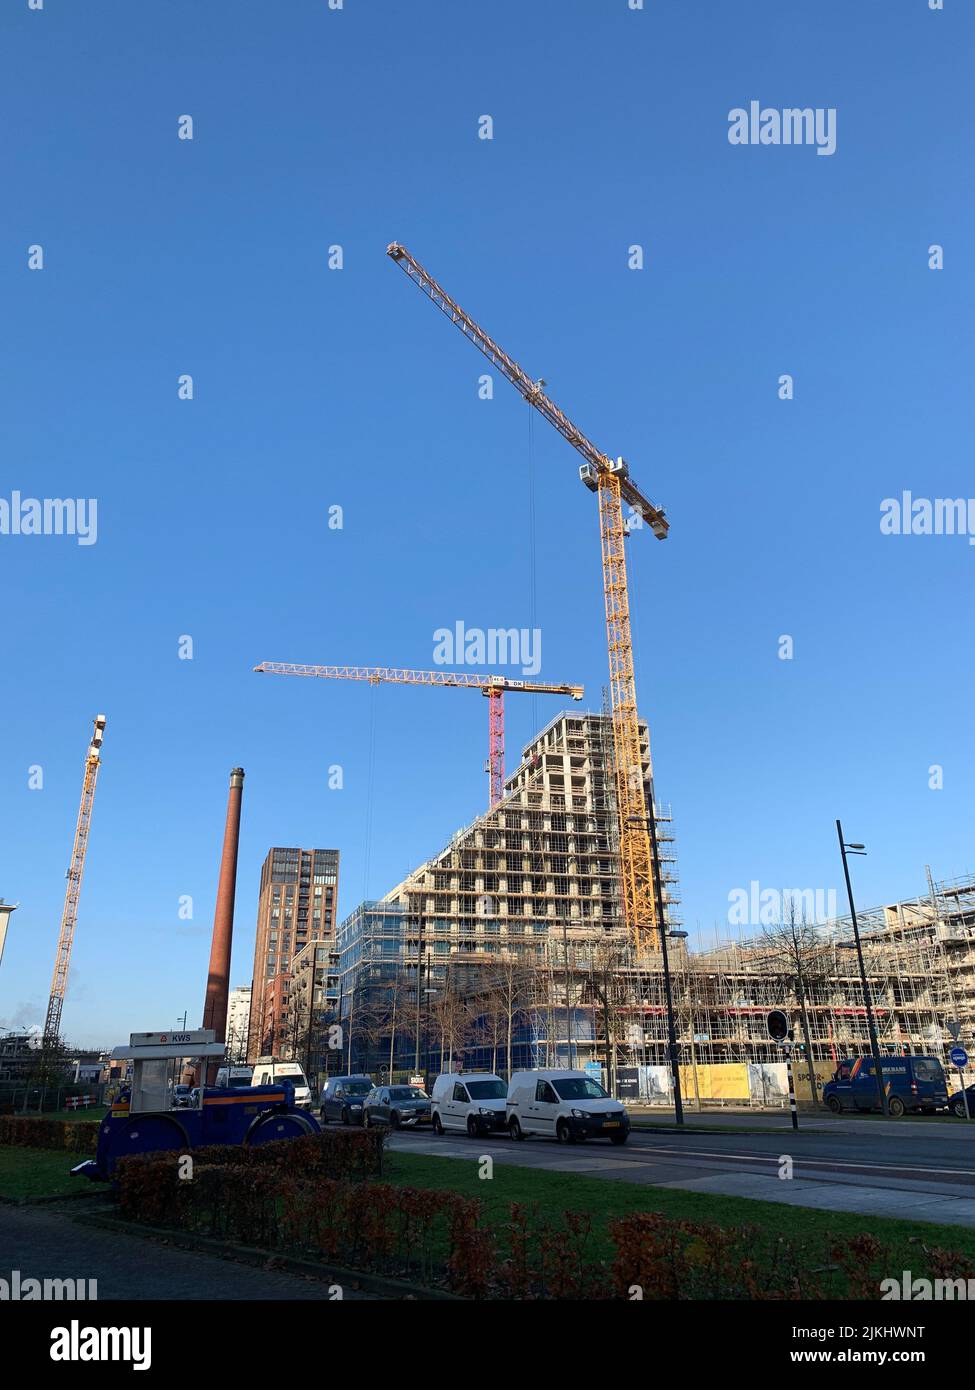 A vertical shot of a construction site building with cranes in Eindhoven, Netherlands Stock Photo